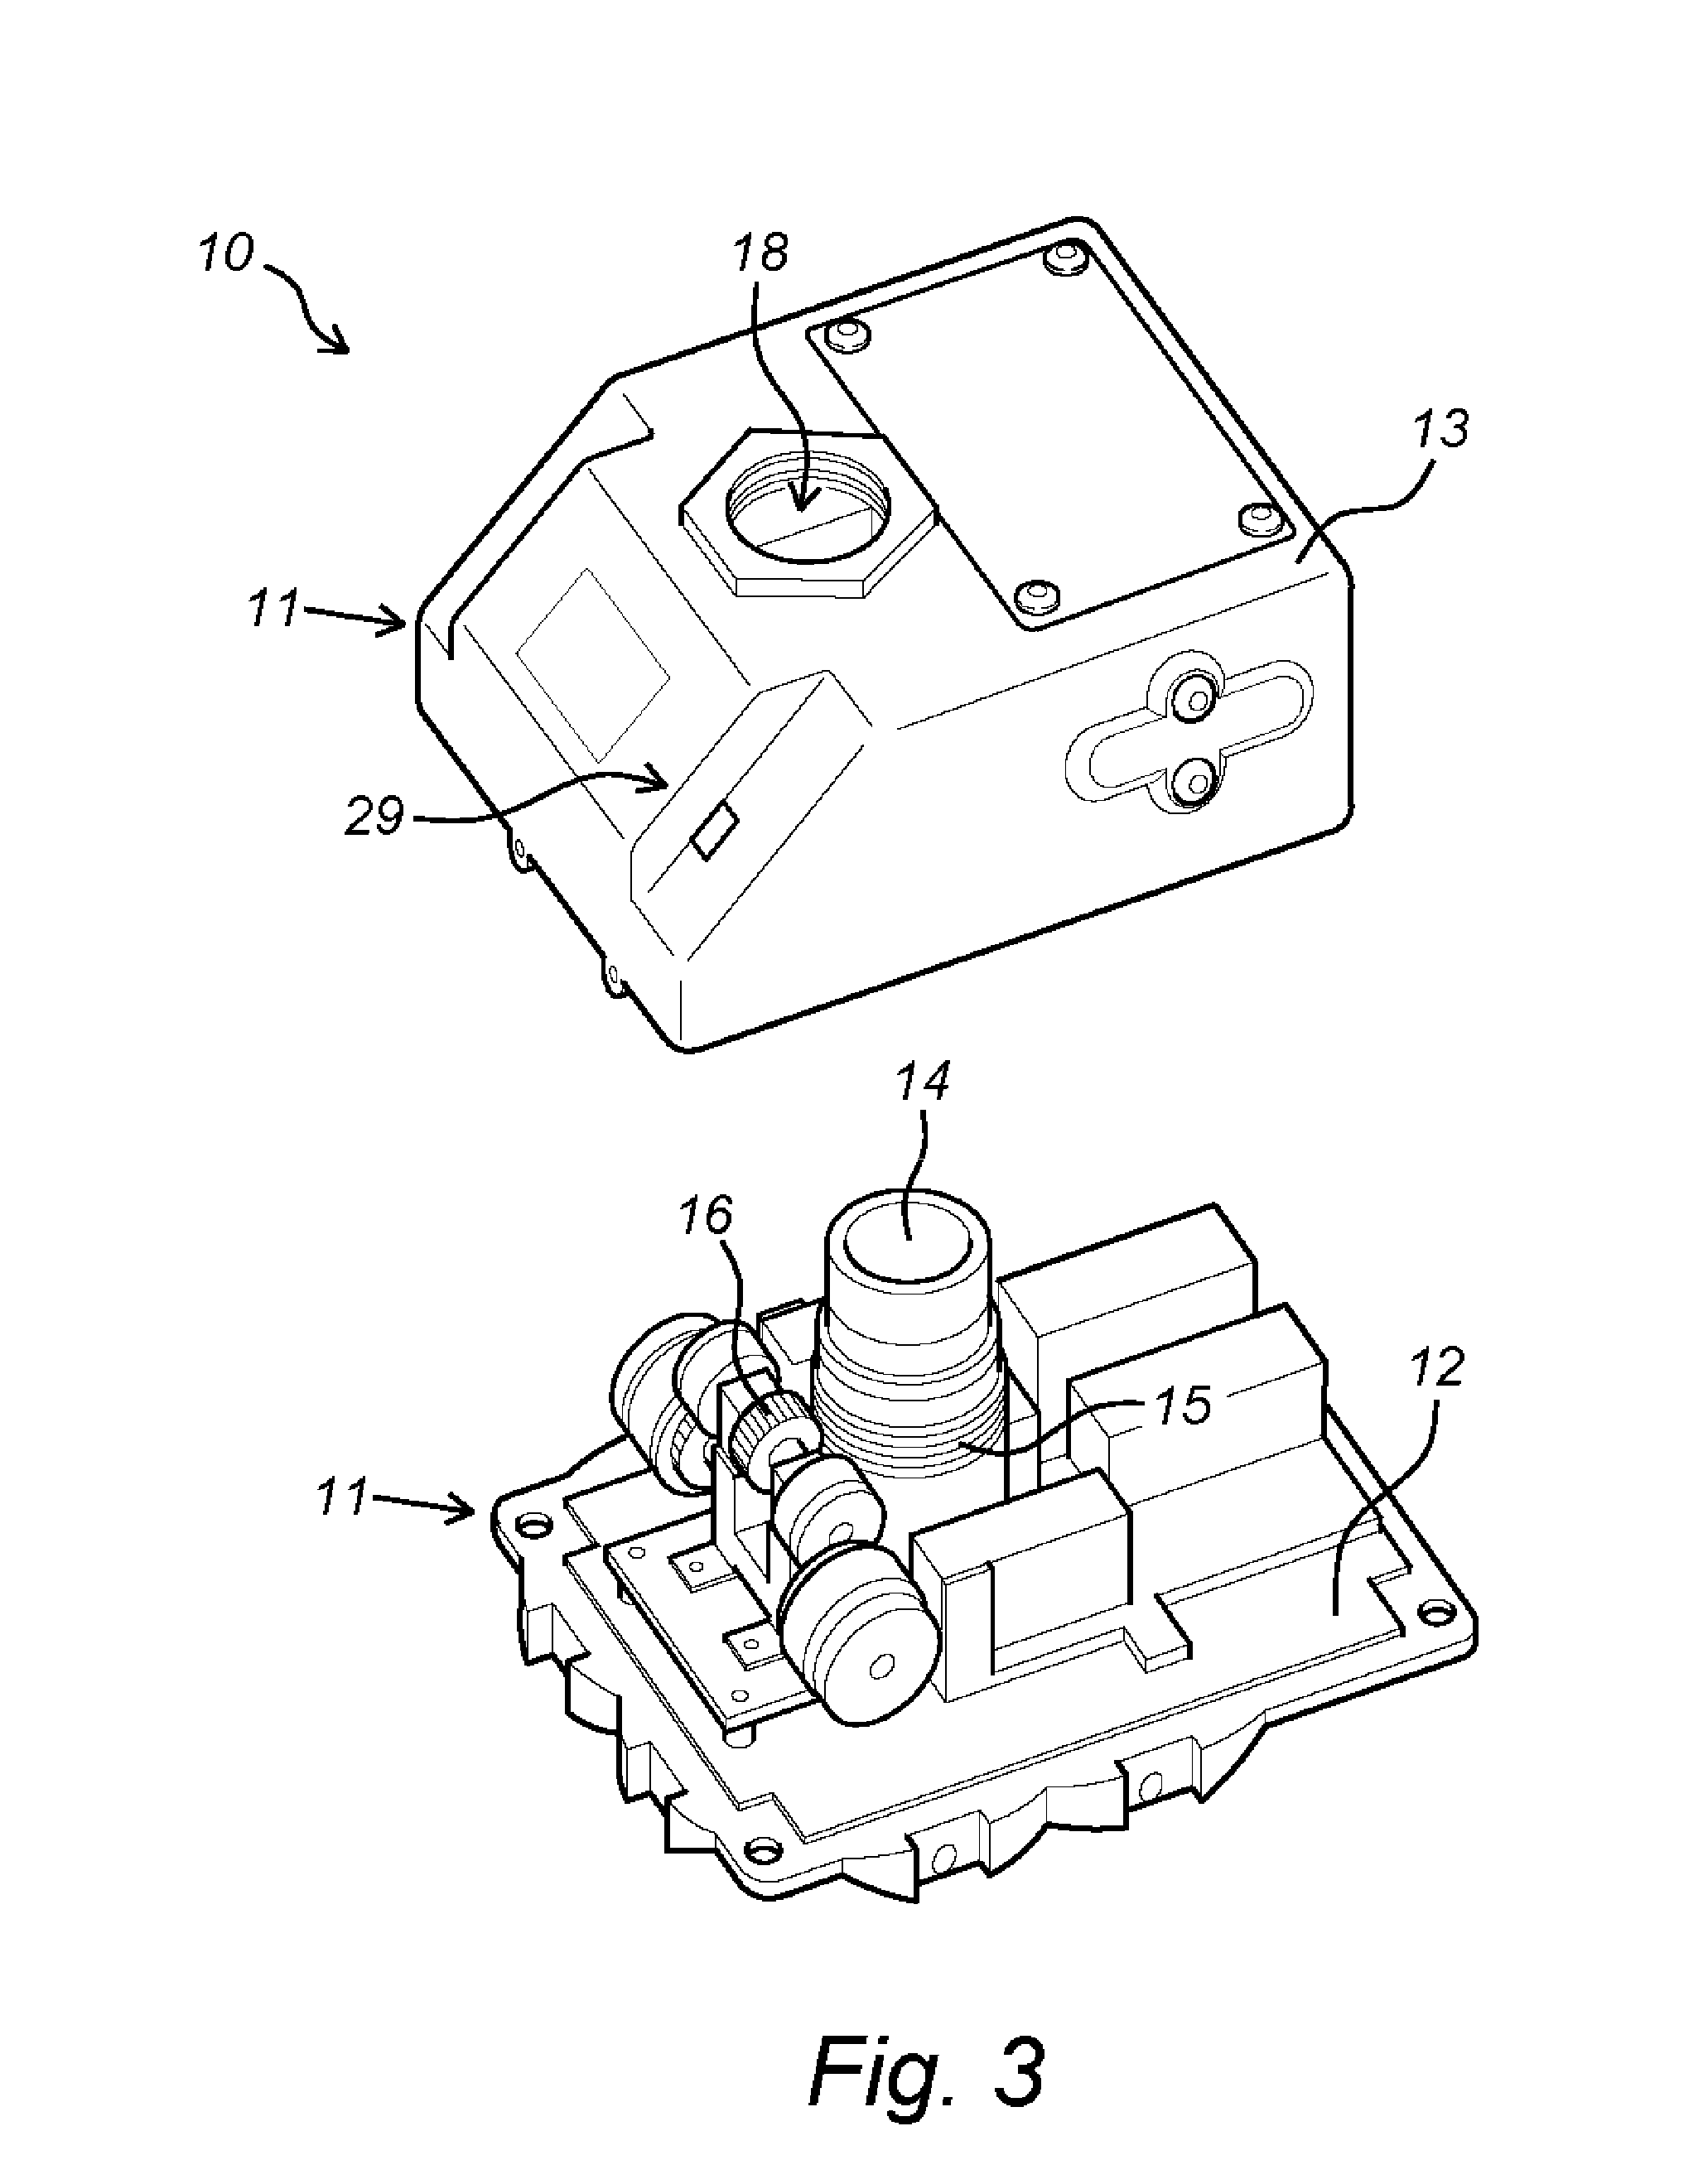 Valve position indicator and a method for indicating a valve position